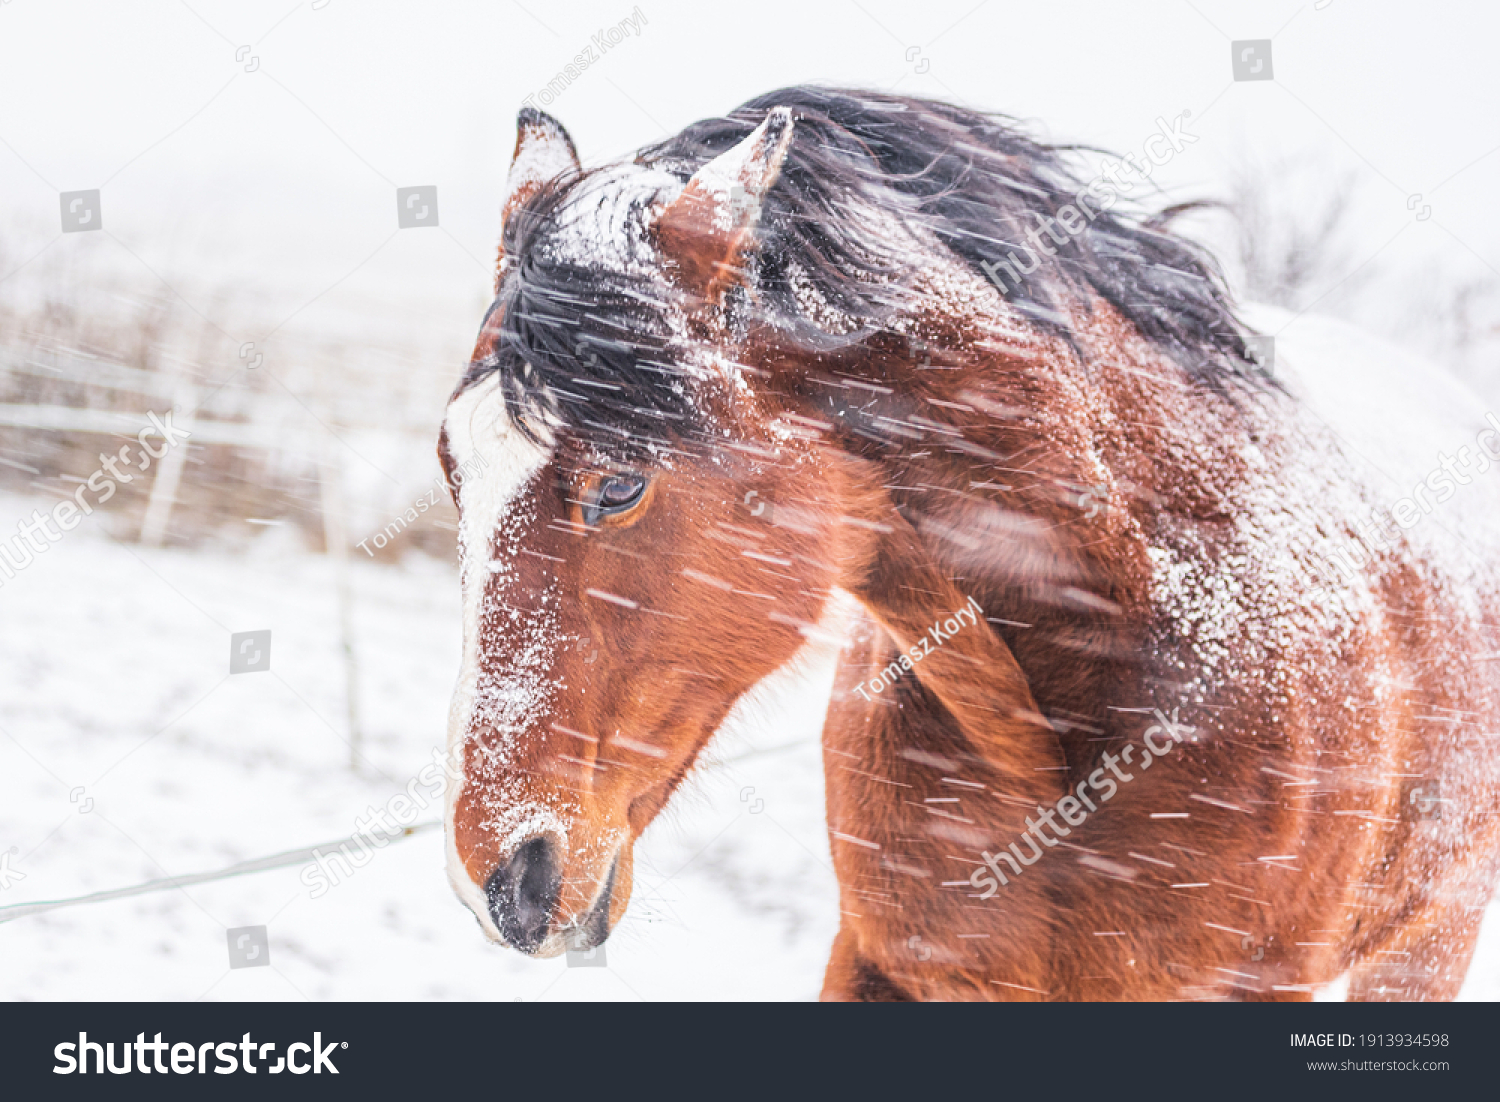 A horse in a paddock on a windy winter day. Visible snowflakes, wind and frost. Close-up of the horse's eyes and head. Winter scenery at the horse farm. #1913934598